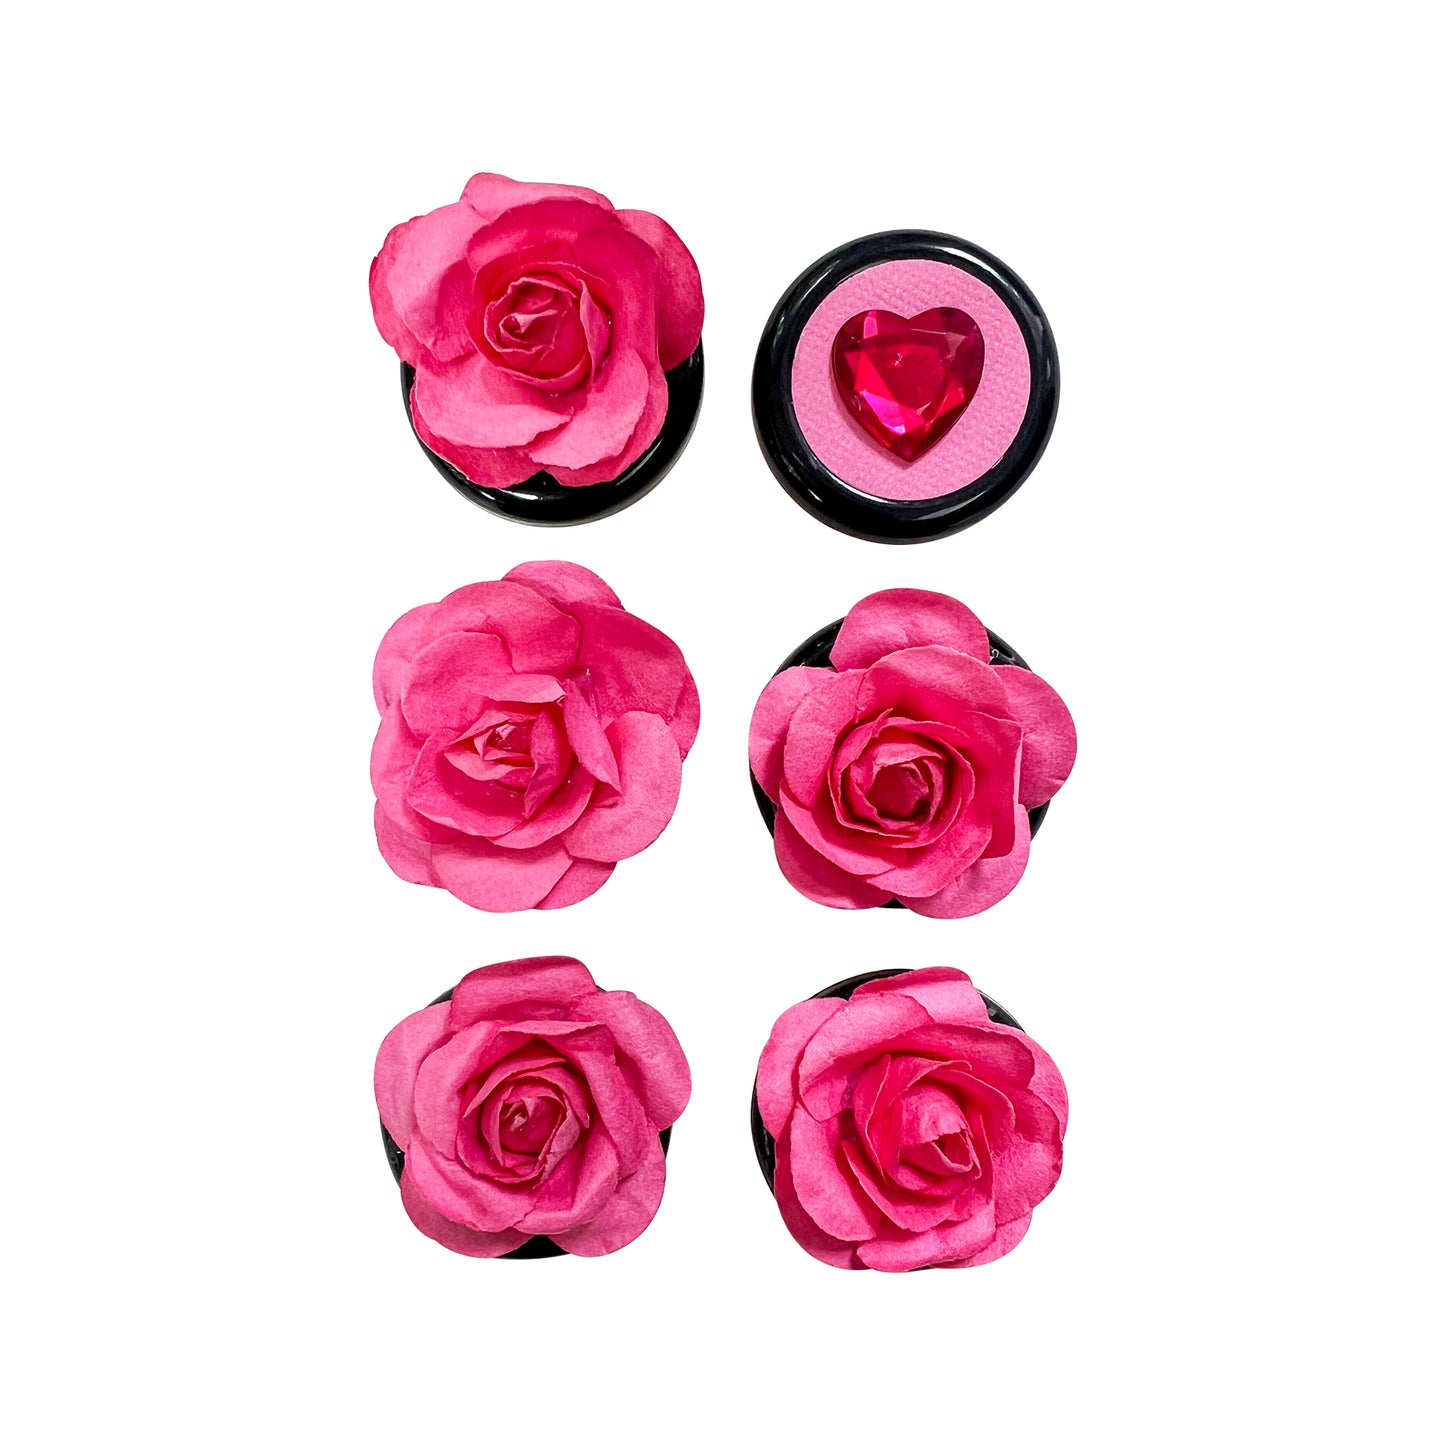 Glass Wrappings set of 6 Bright Pink Flowers + Pink Gem Heart embellishments. 5 paper roses and 1 gem heart atop black buttons.